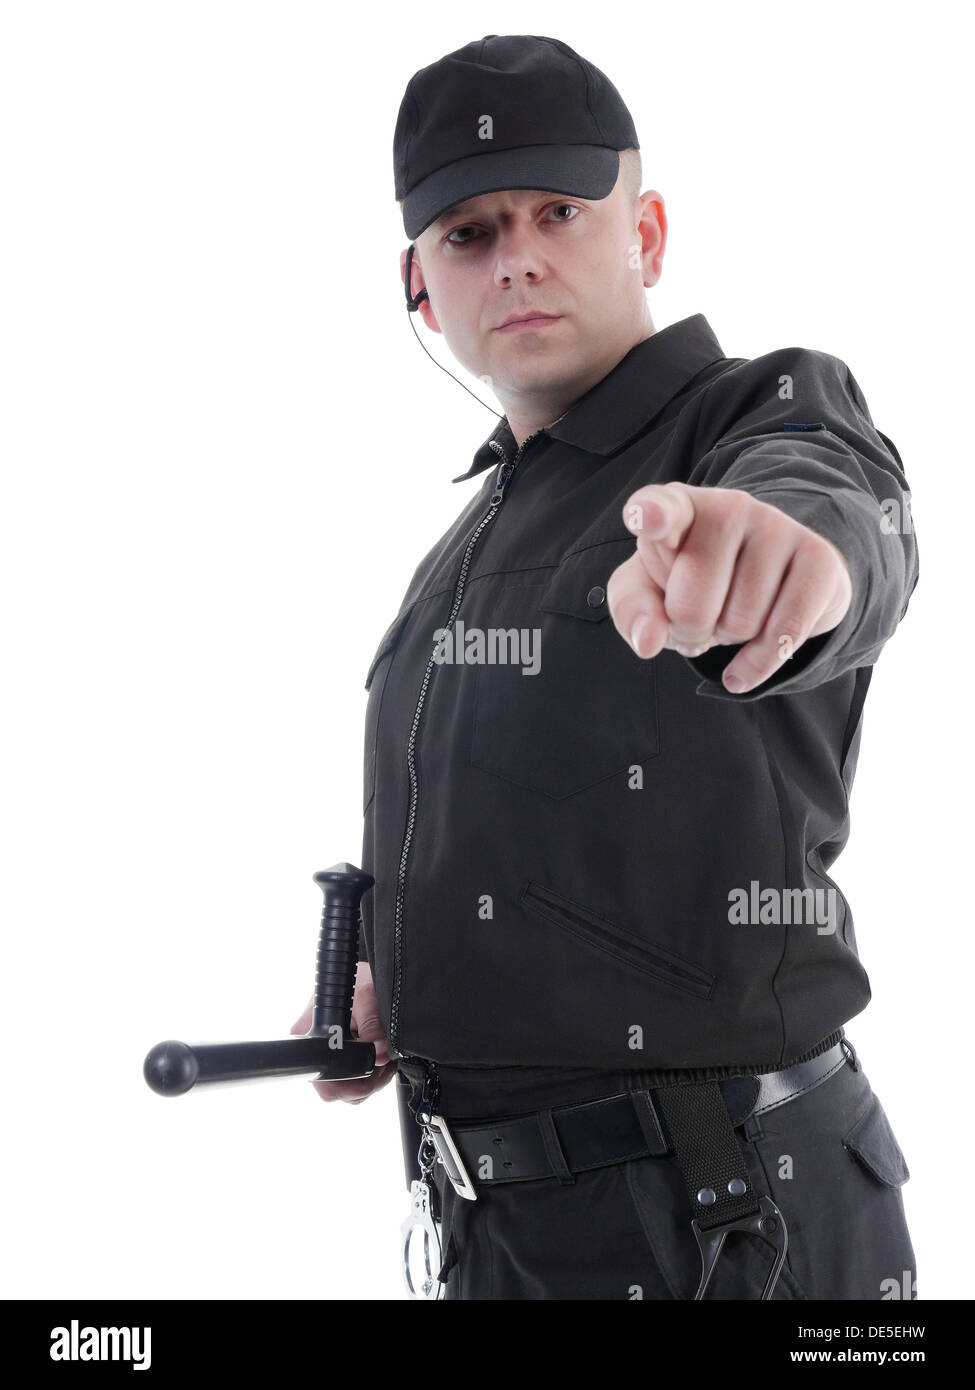 Policeman wearing black uniform pointing in ordering manner Stock Photo